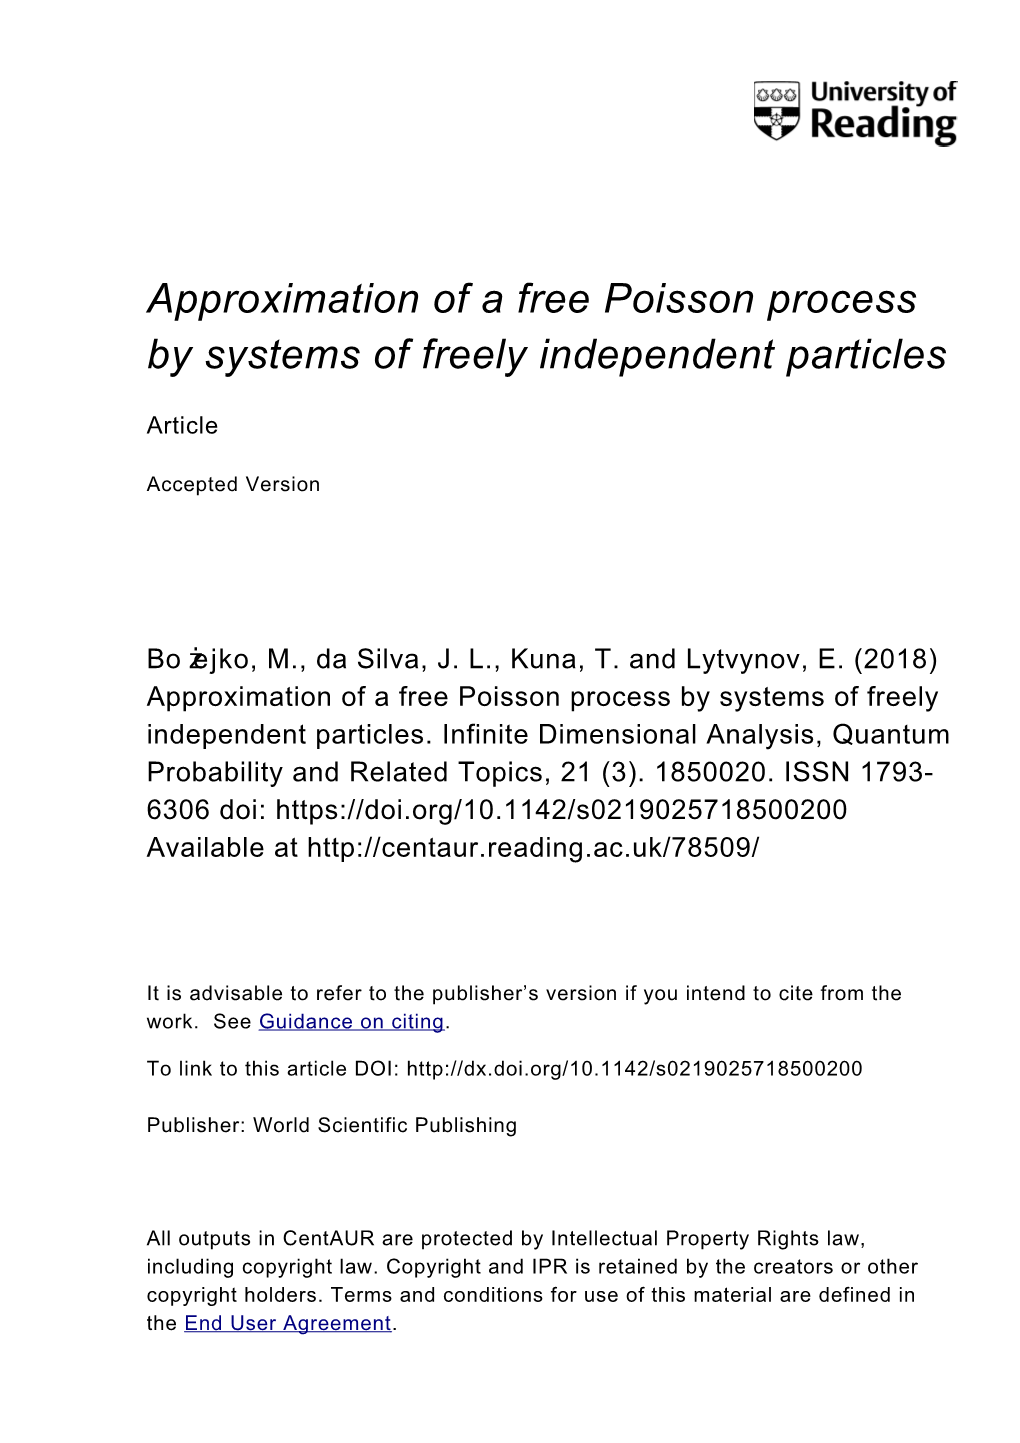 Approximation of a Free Poisson Process by Systems of Freely Independent Particles